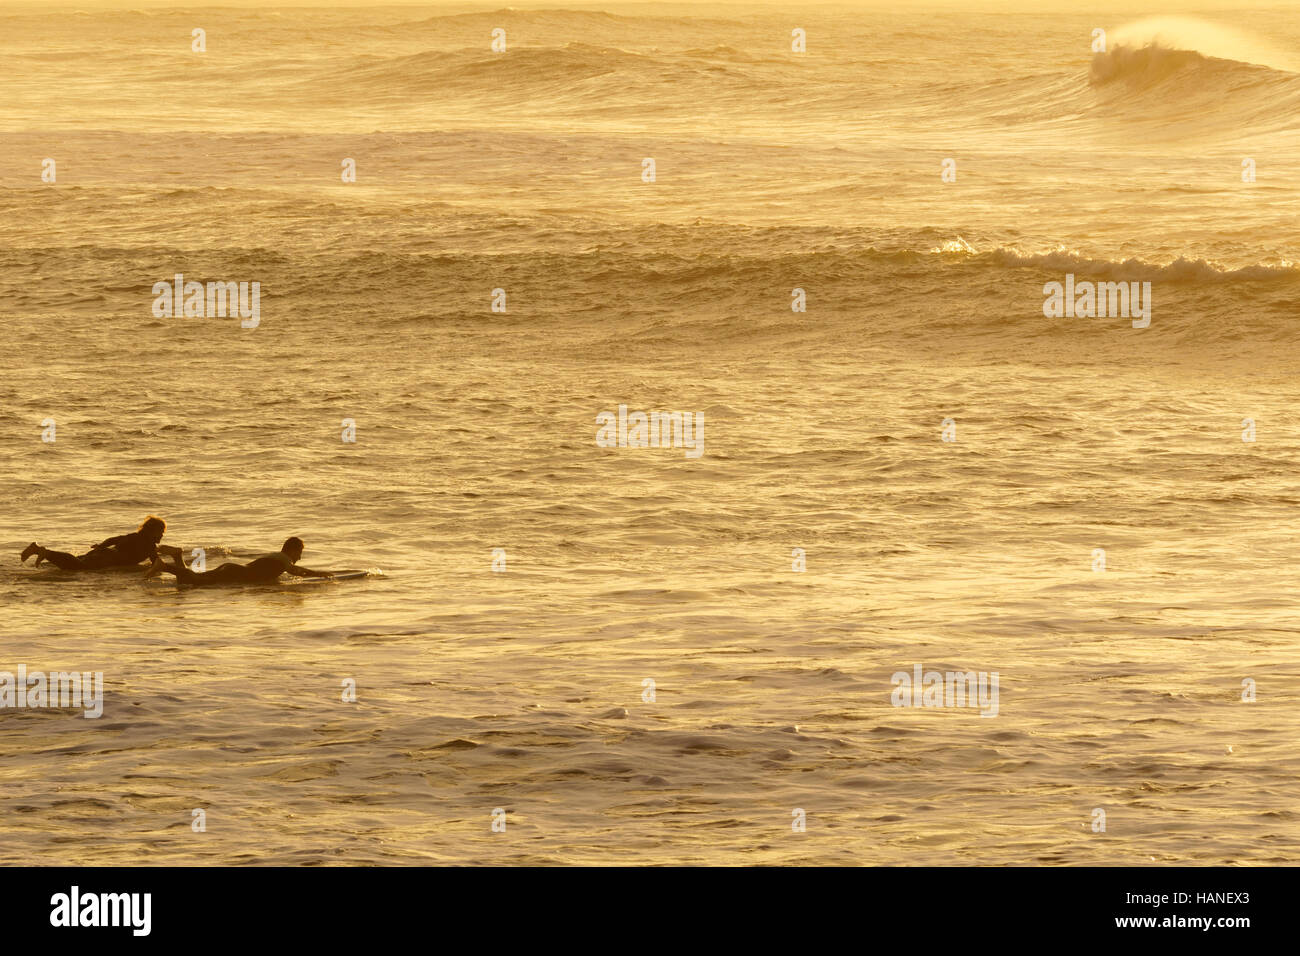 Two men row with their longboard to the waves in the Caños de Meca at sunrise, in the background sandstones cliffs Stock Photo